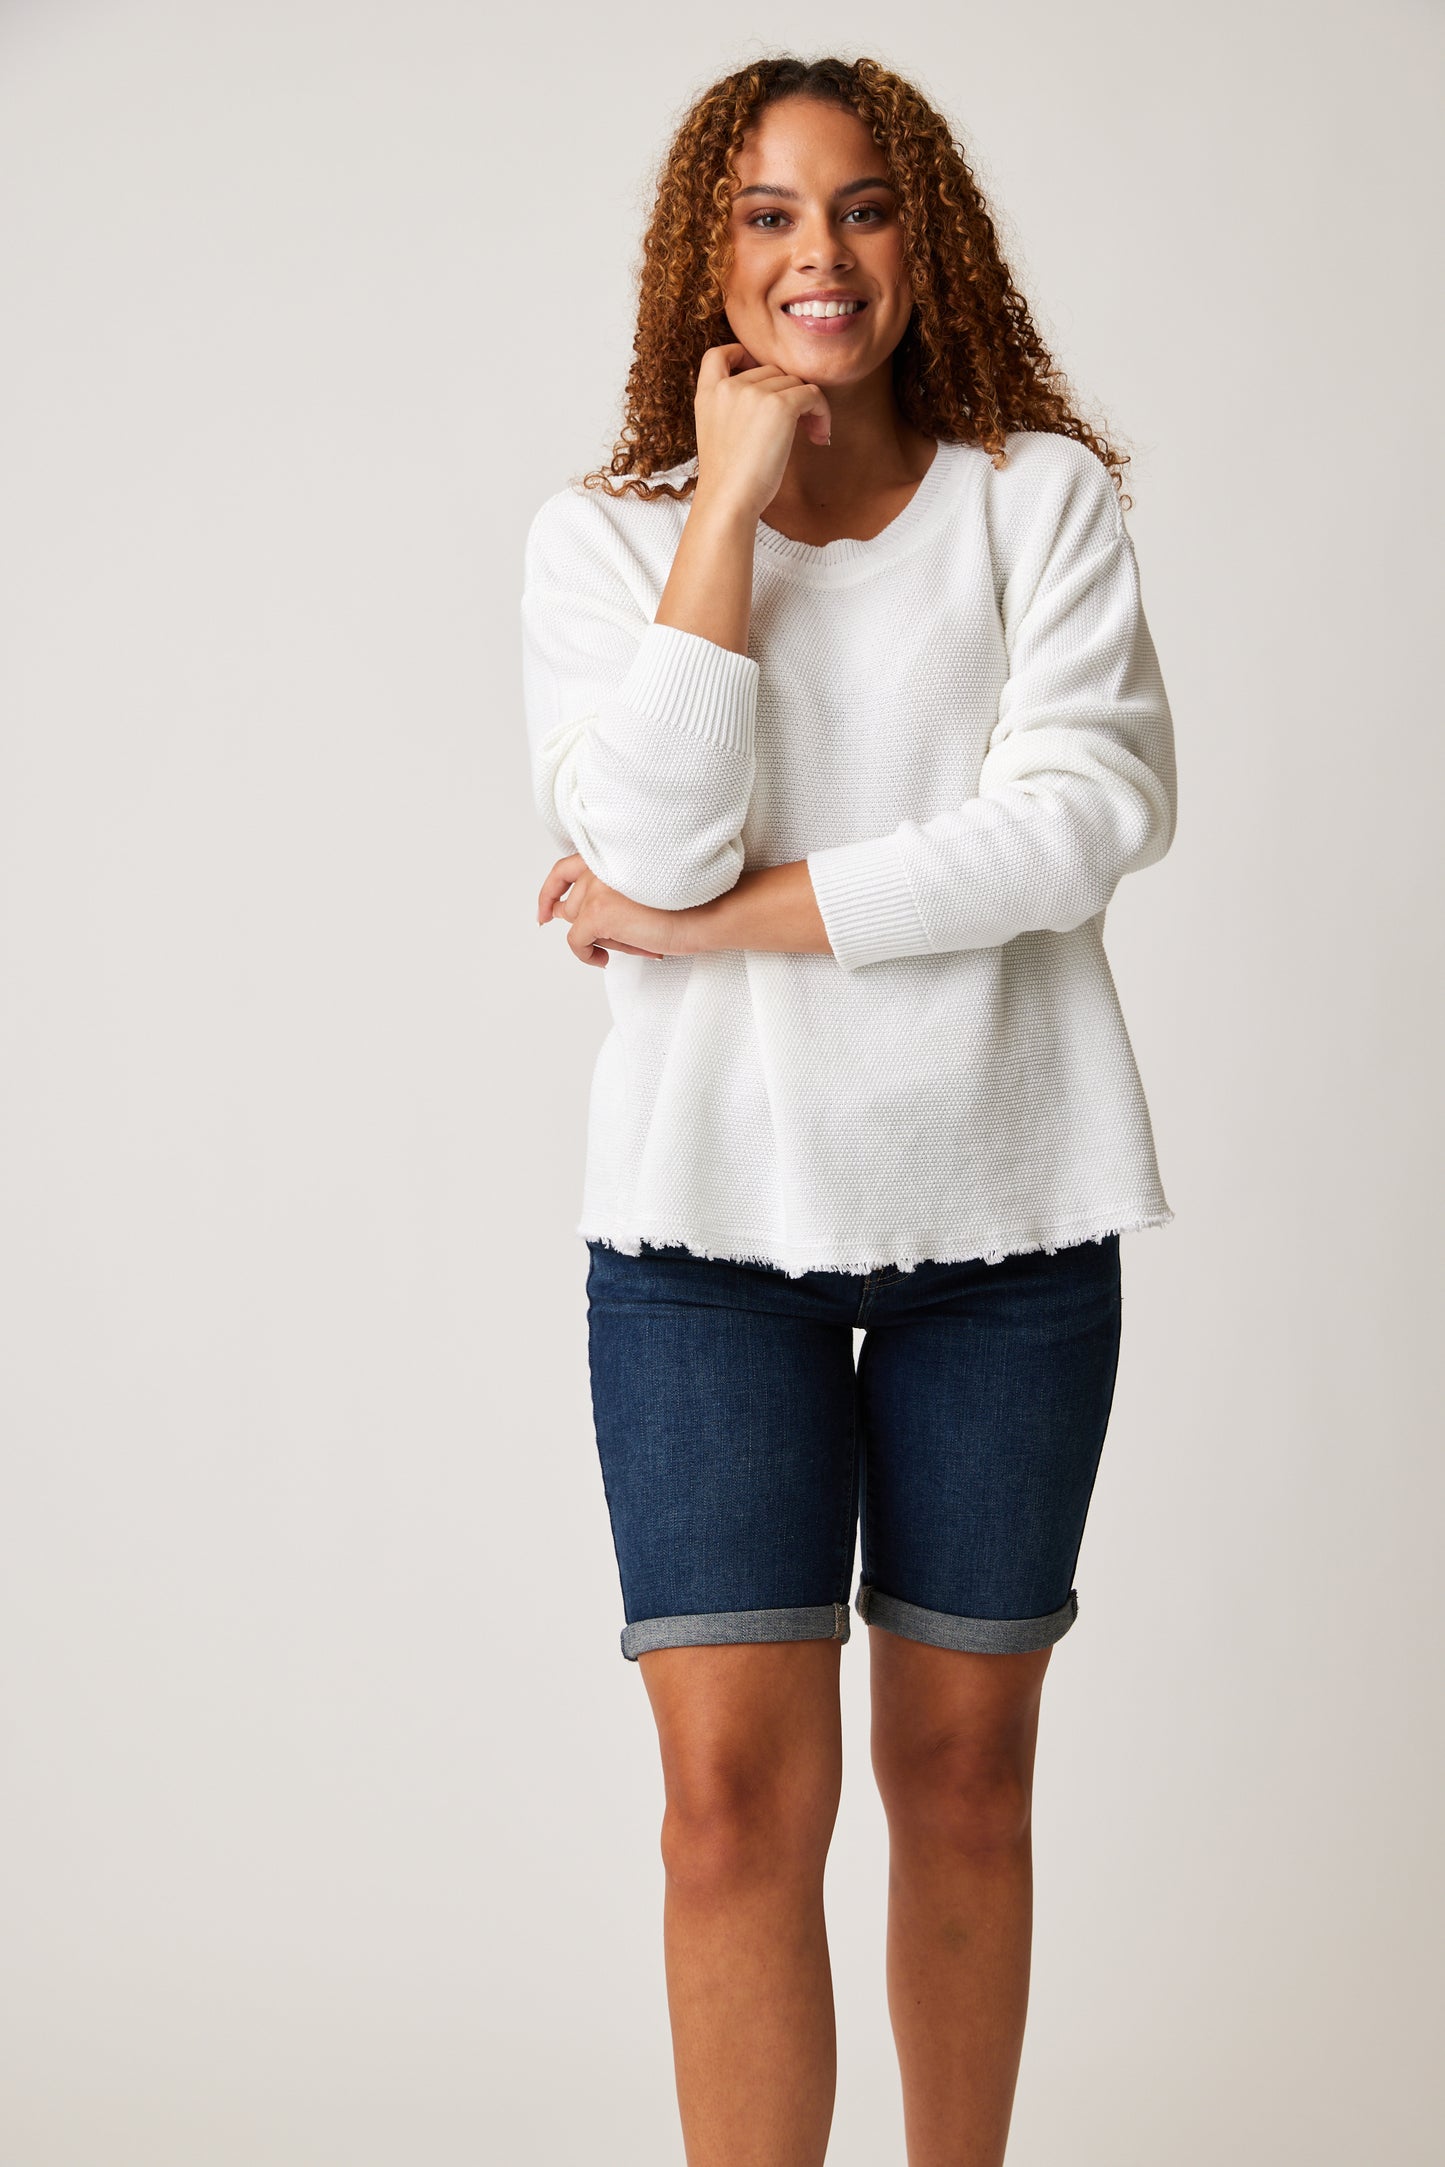 A woman looking stylish in a cozy white Cotton Country Sparrow Sweatshirt and skirt.